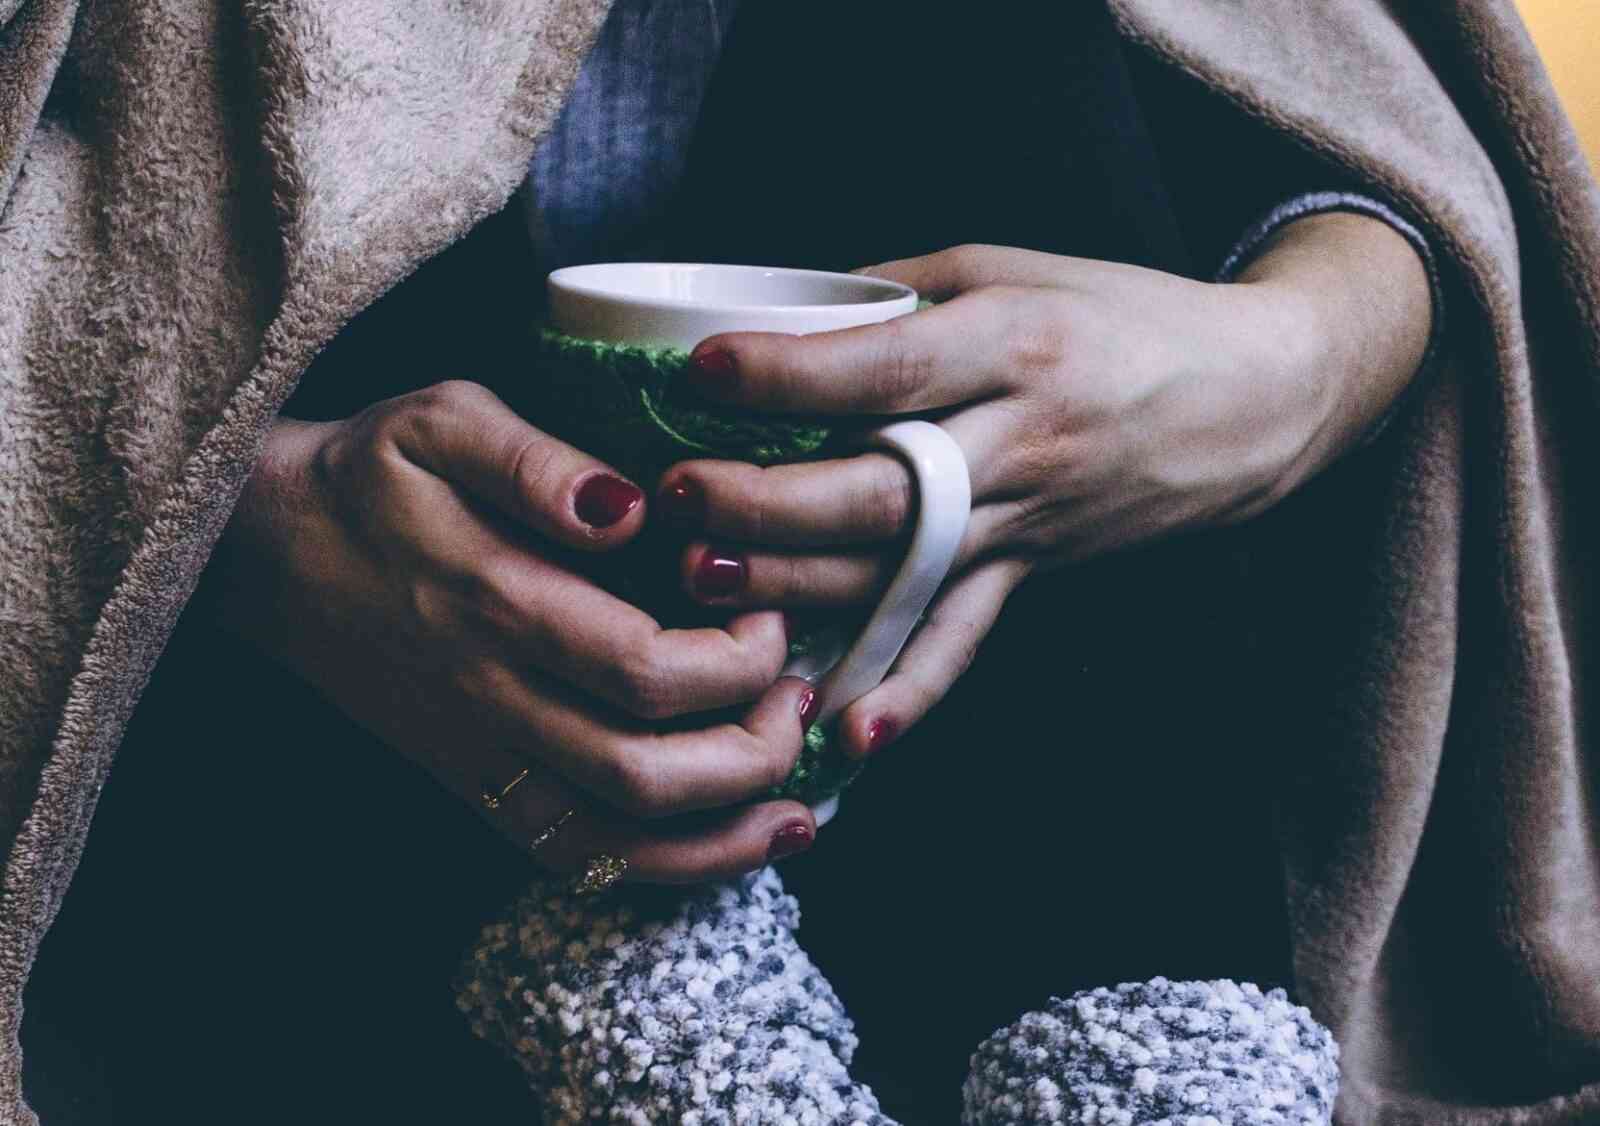 Woman with chronic pain holding a coffee cup and wrapped in a blanket.